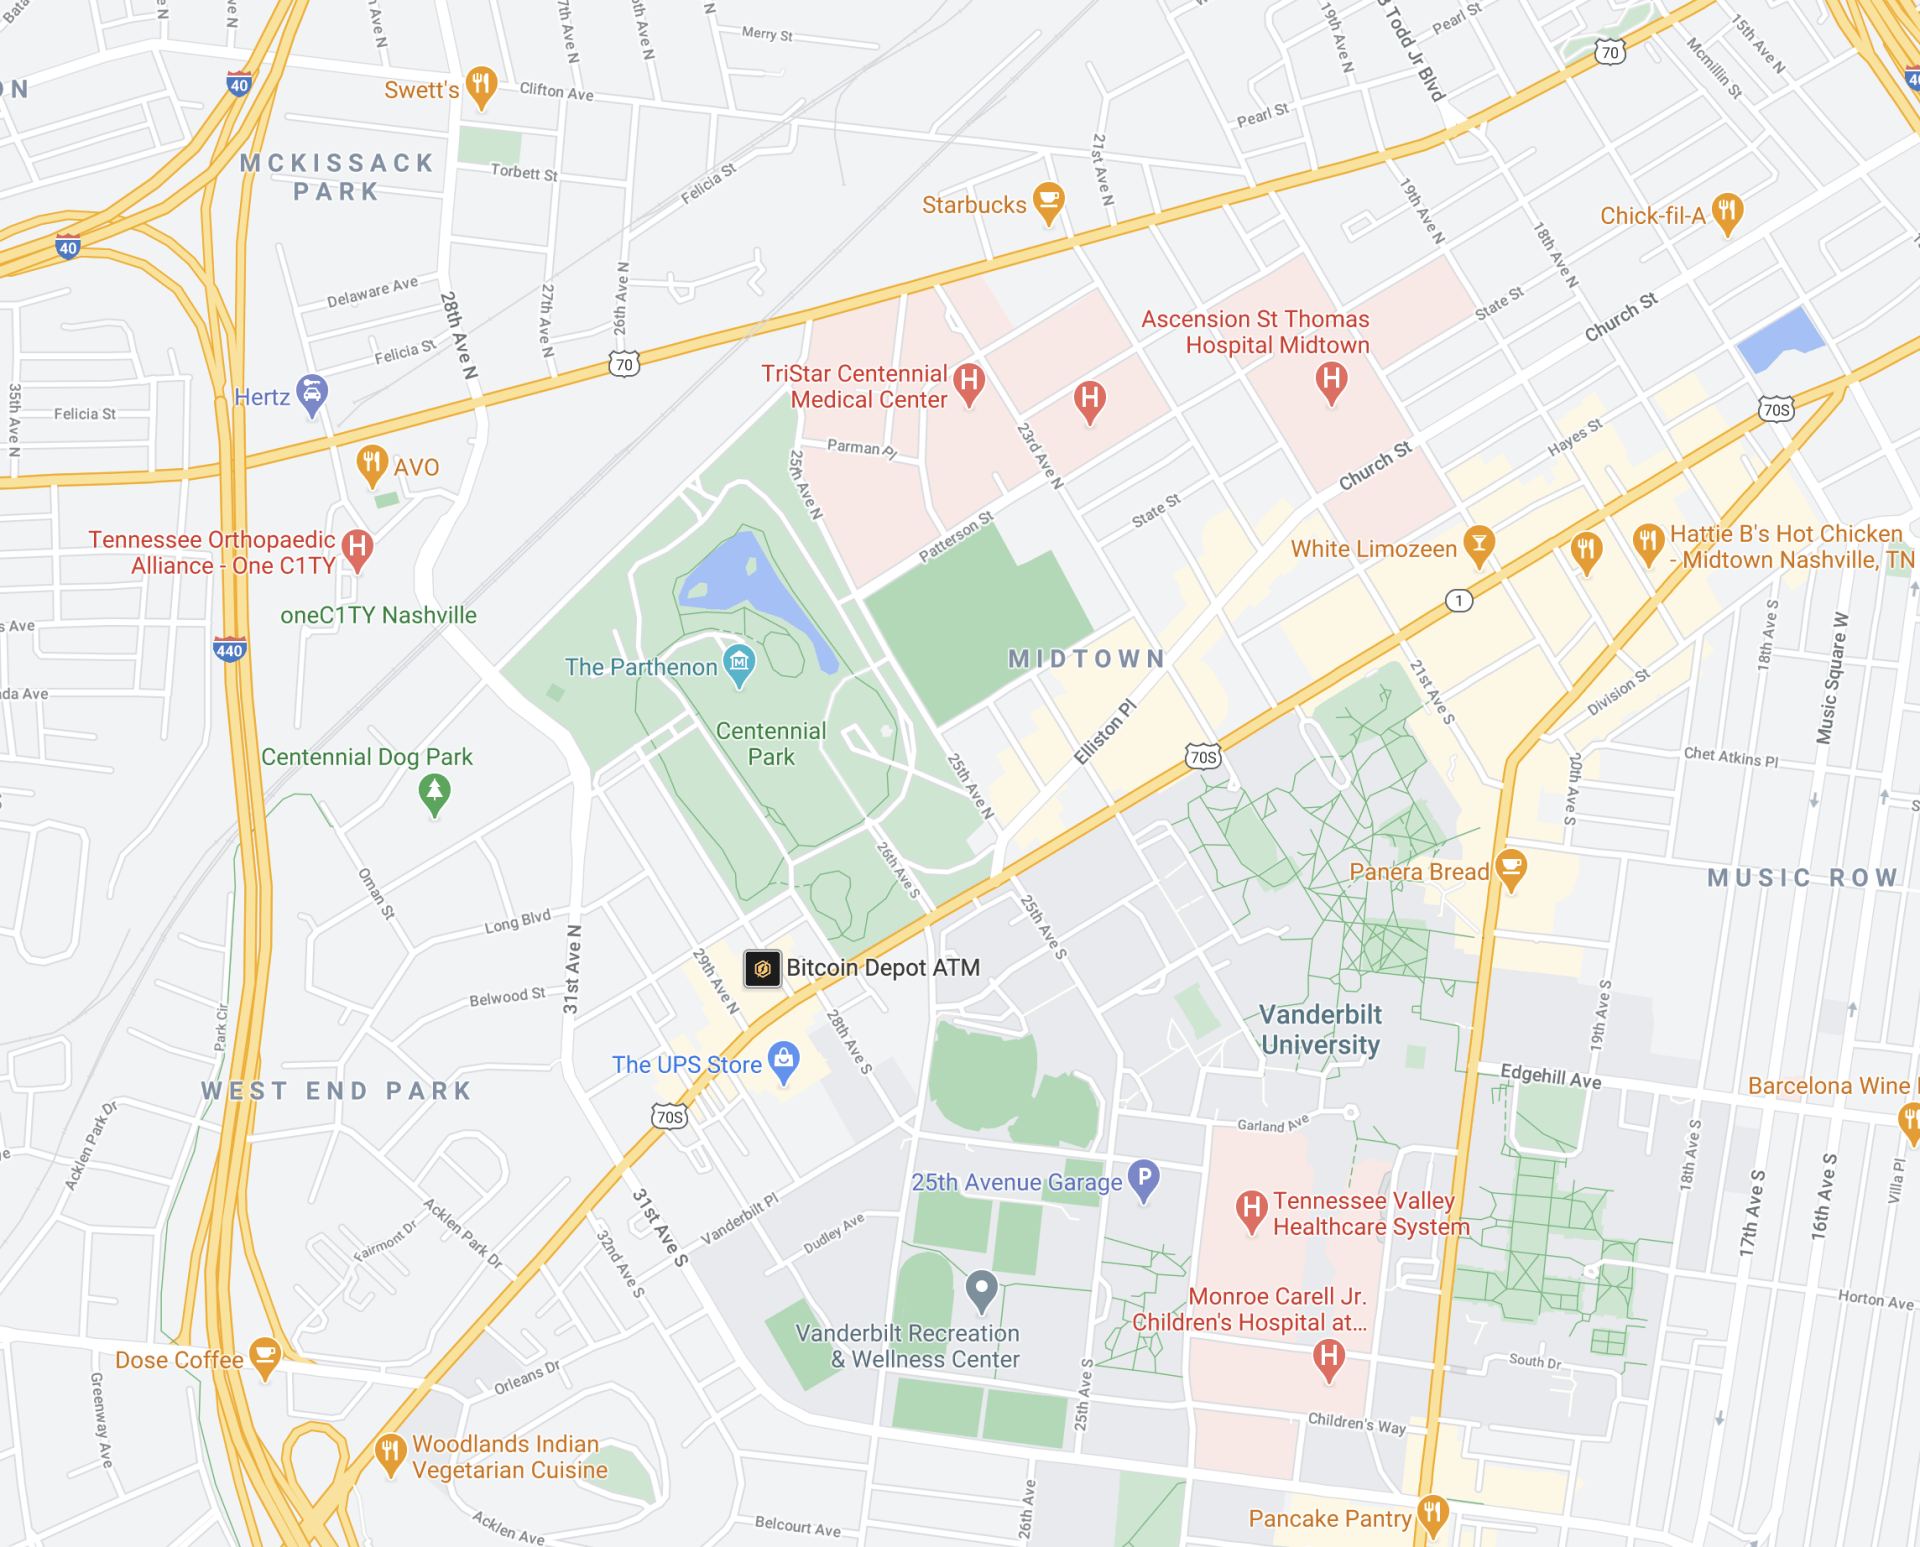 map of the West End neighborhood, Nashville Tennessee